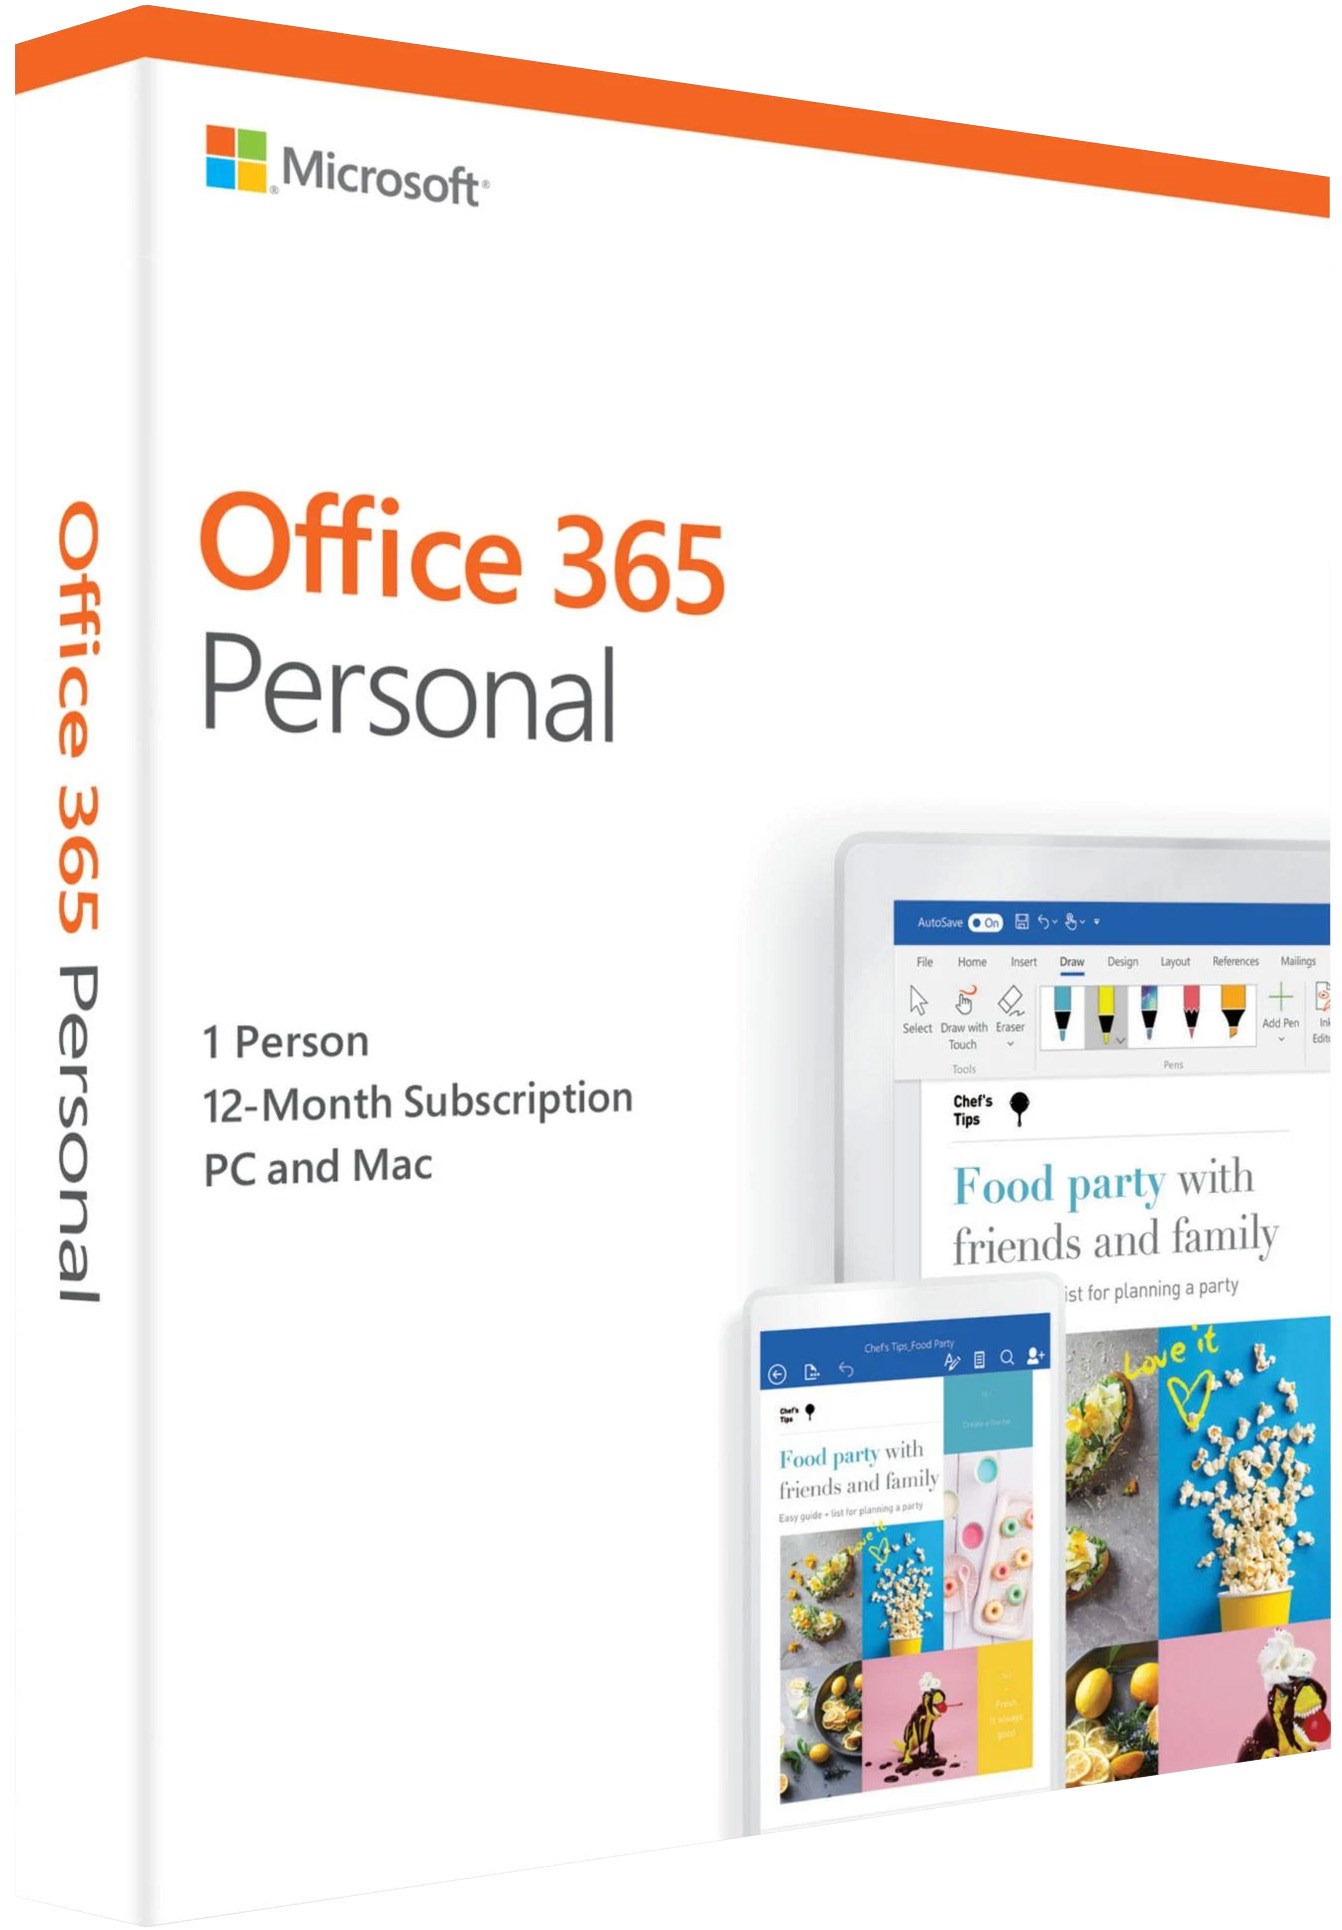 can office 365 personal be installed on two computers